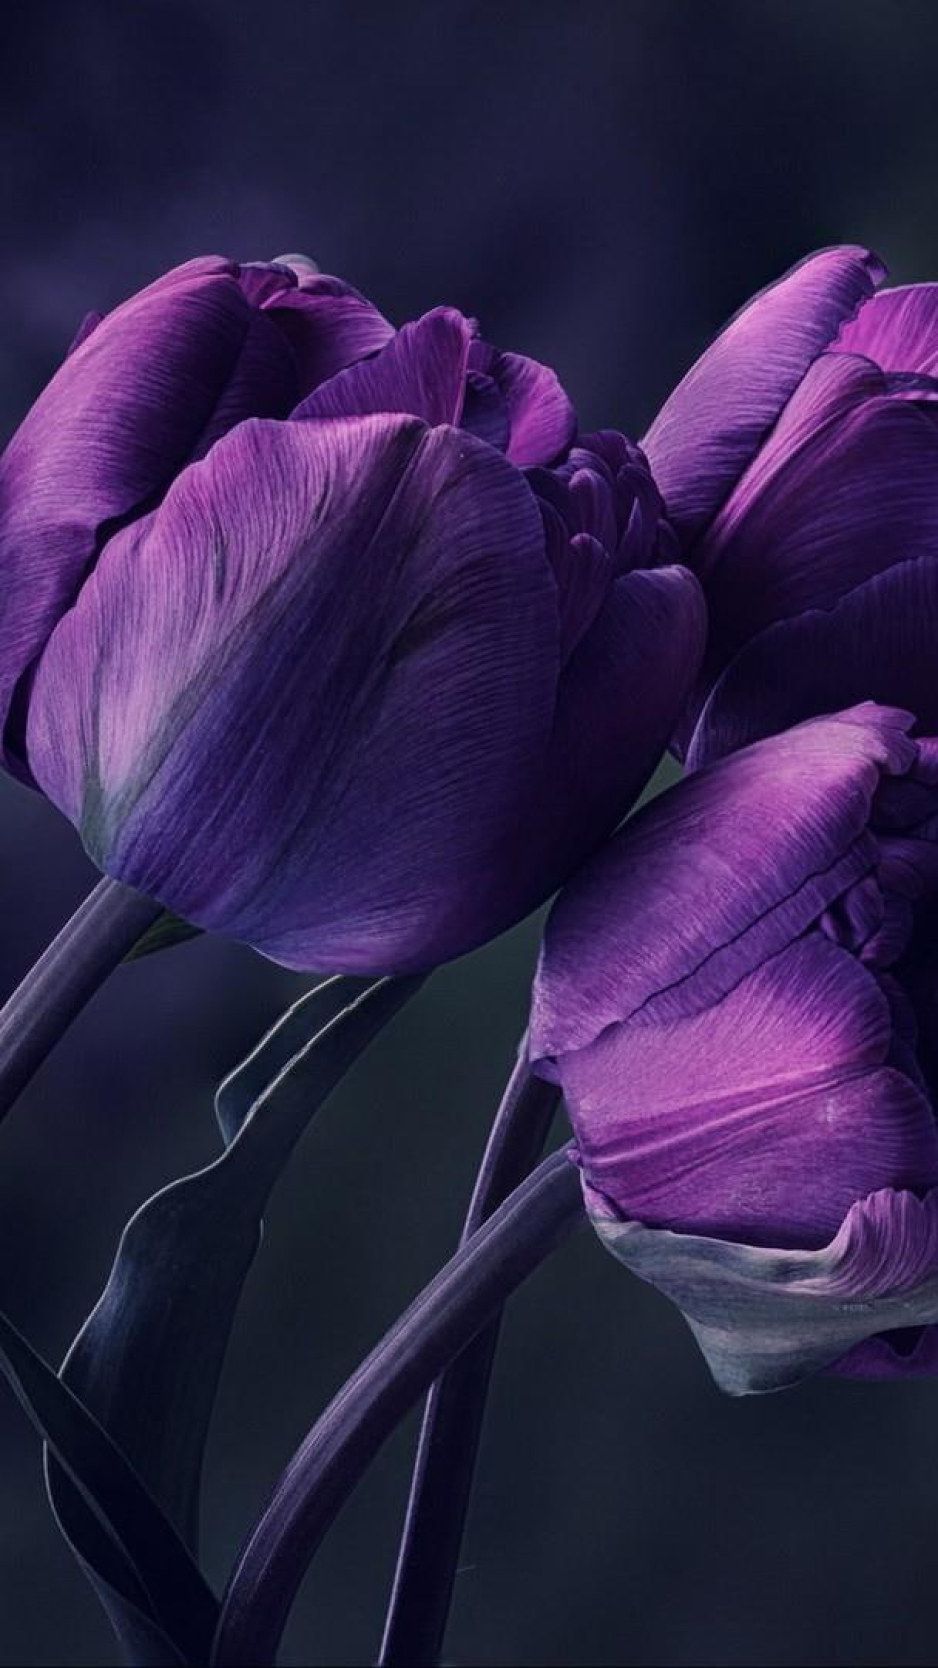 A close up of some purple tulips - Tulip